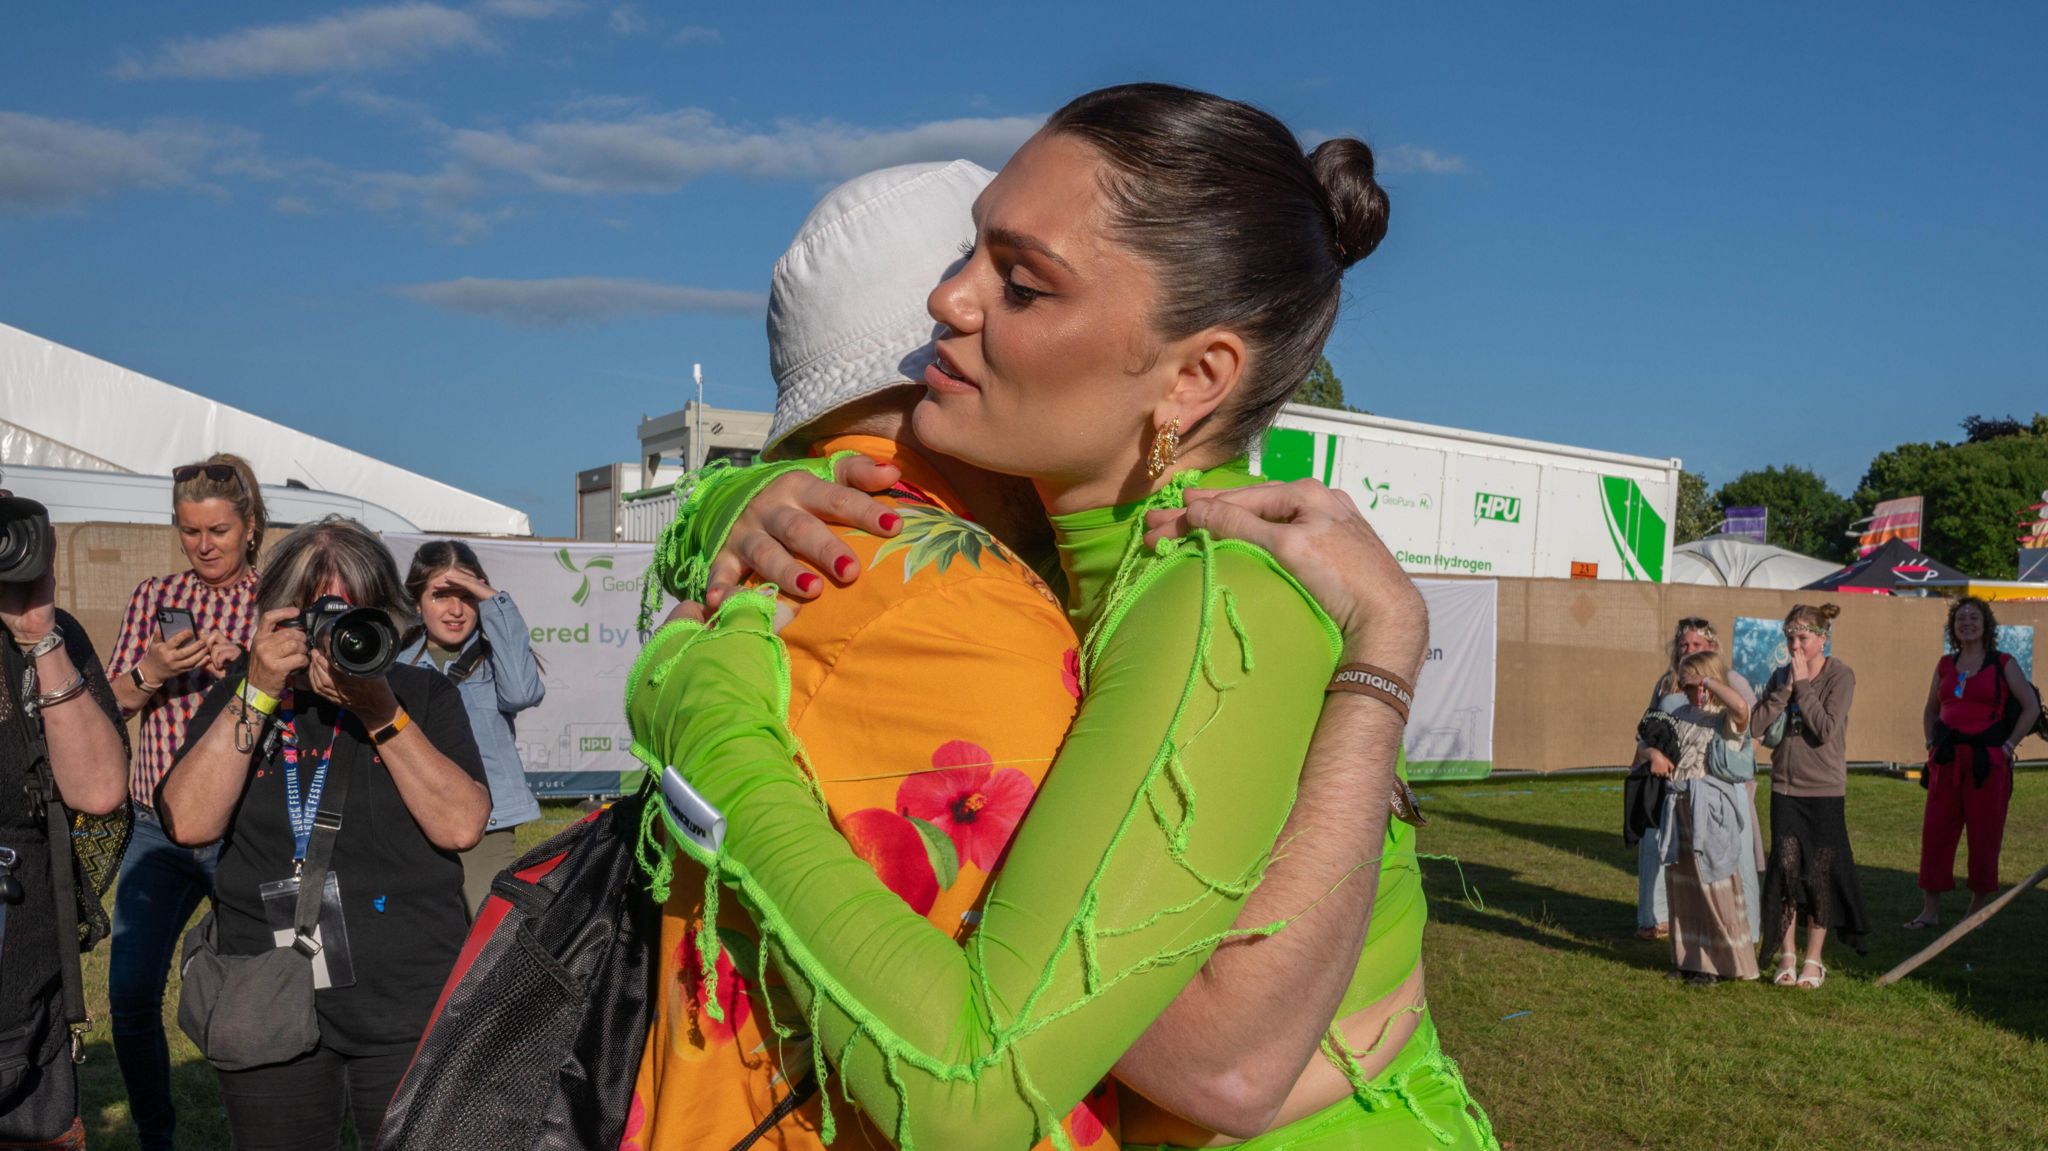 Jessie J in a lime green outfit hugging Nathan who is wearing a orange shirt with pink flowers on. He is also wearing a white bucket hat and crowds of photographers and spectators are around watching the embrace